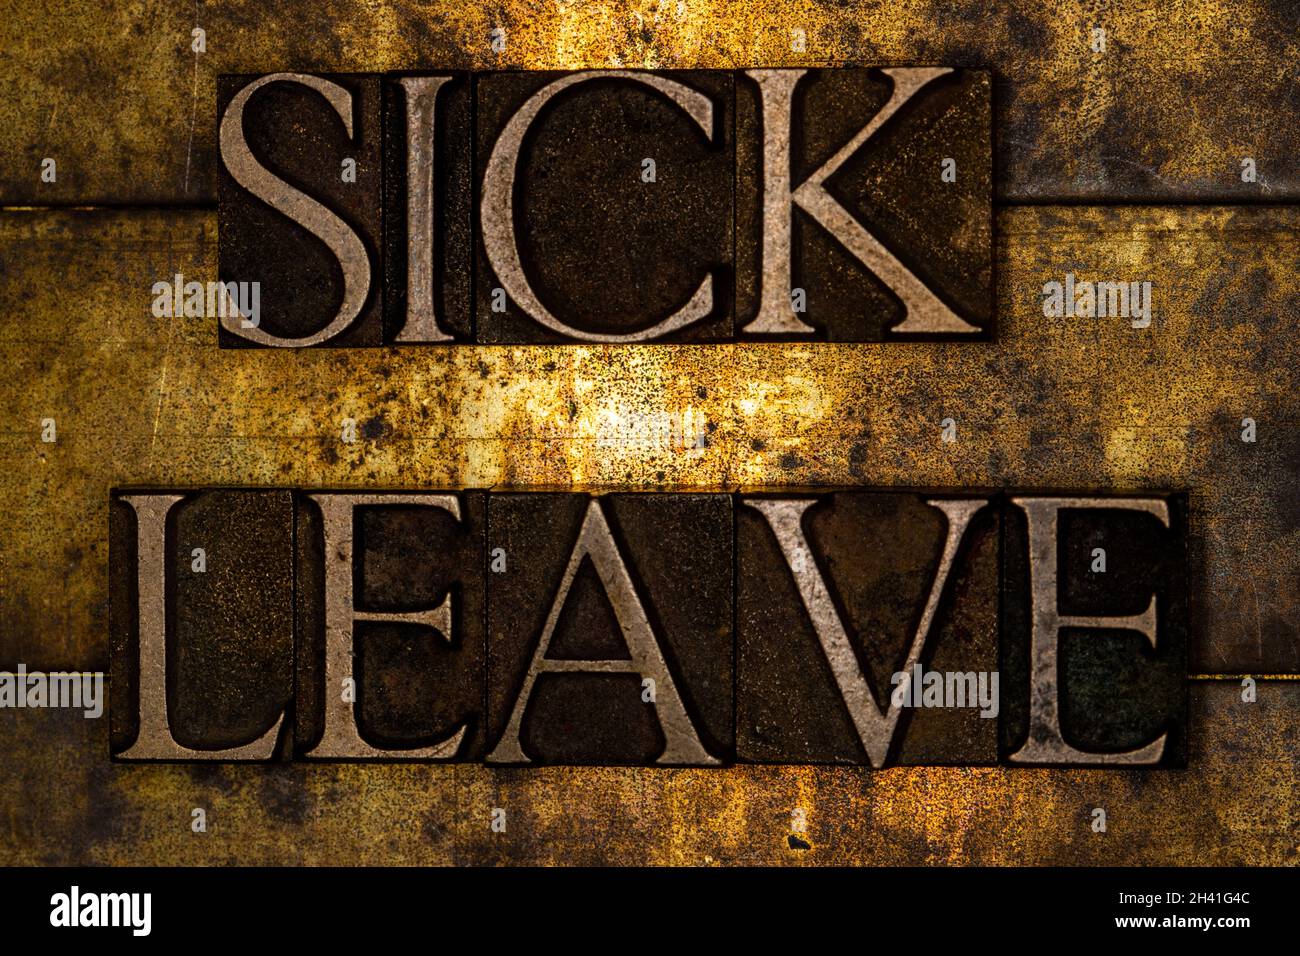 Sick Leave text on textured grunge copper and vintage gold background Stock Photo